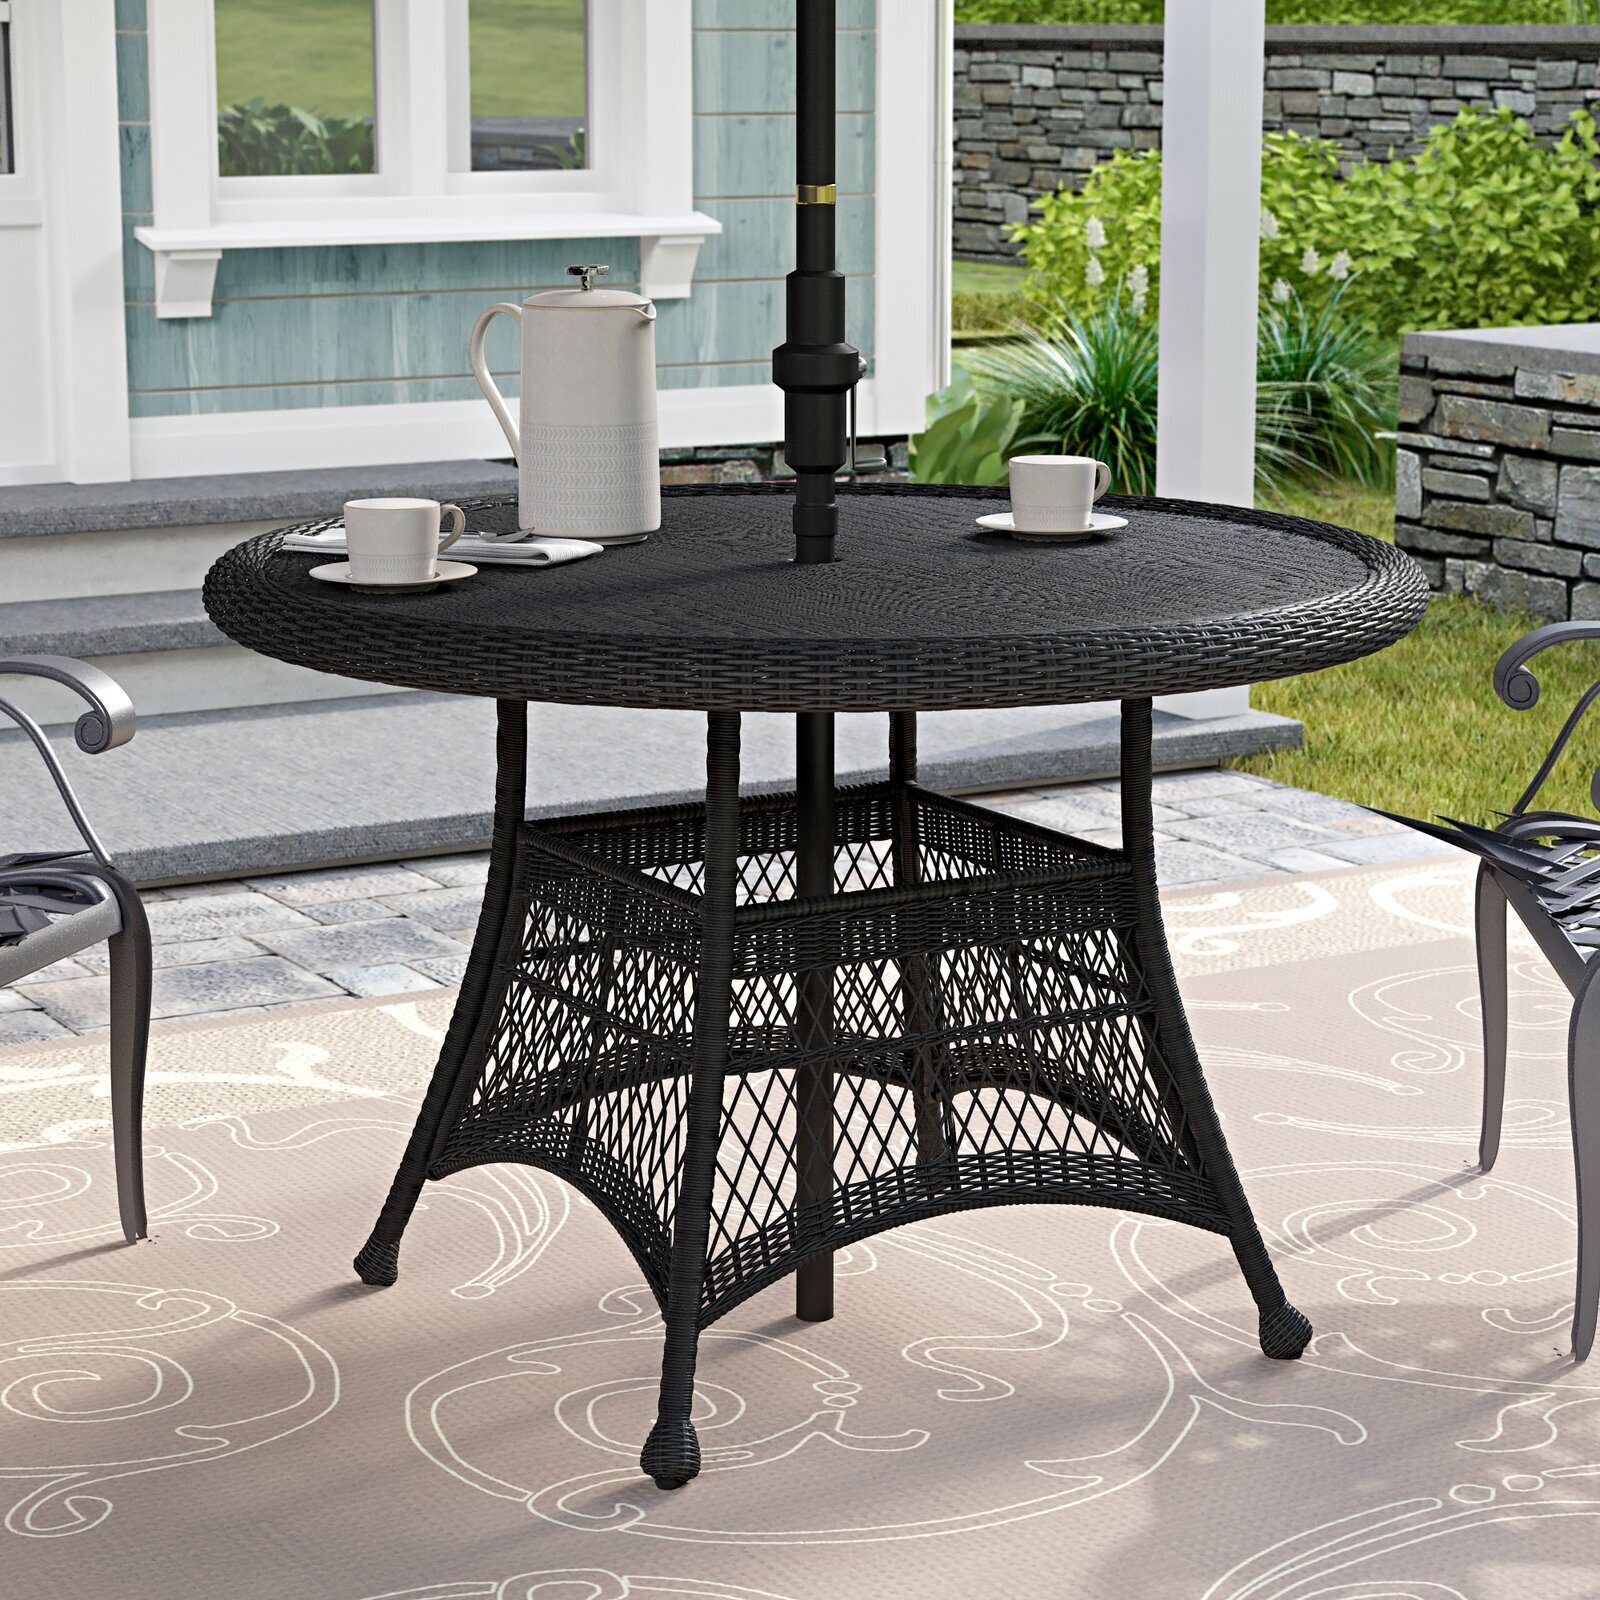 Black Large Round Patio Dining Table